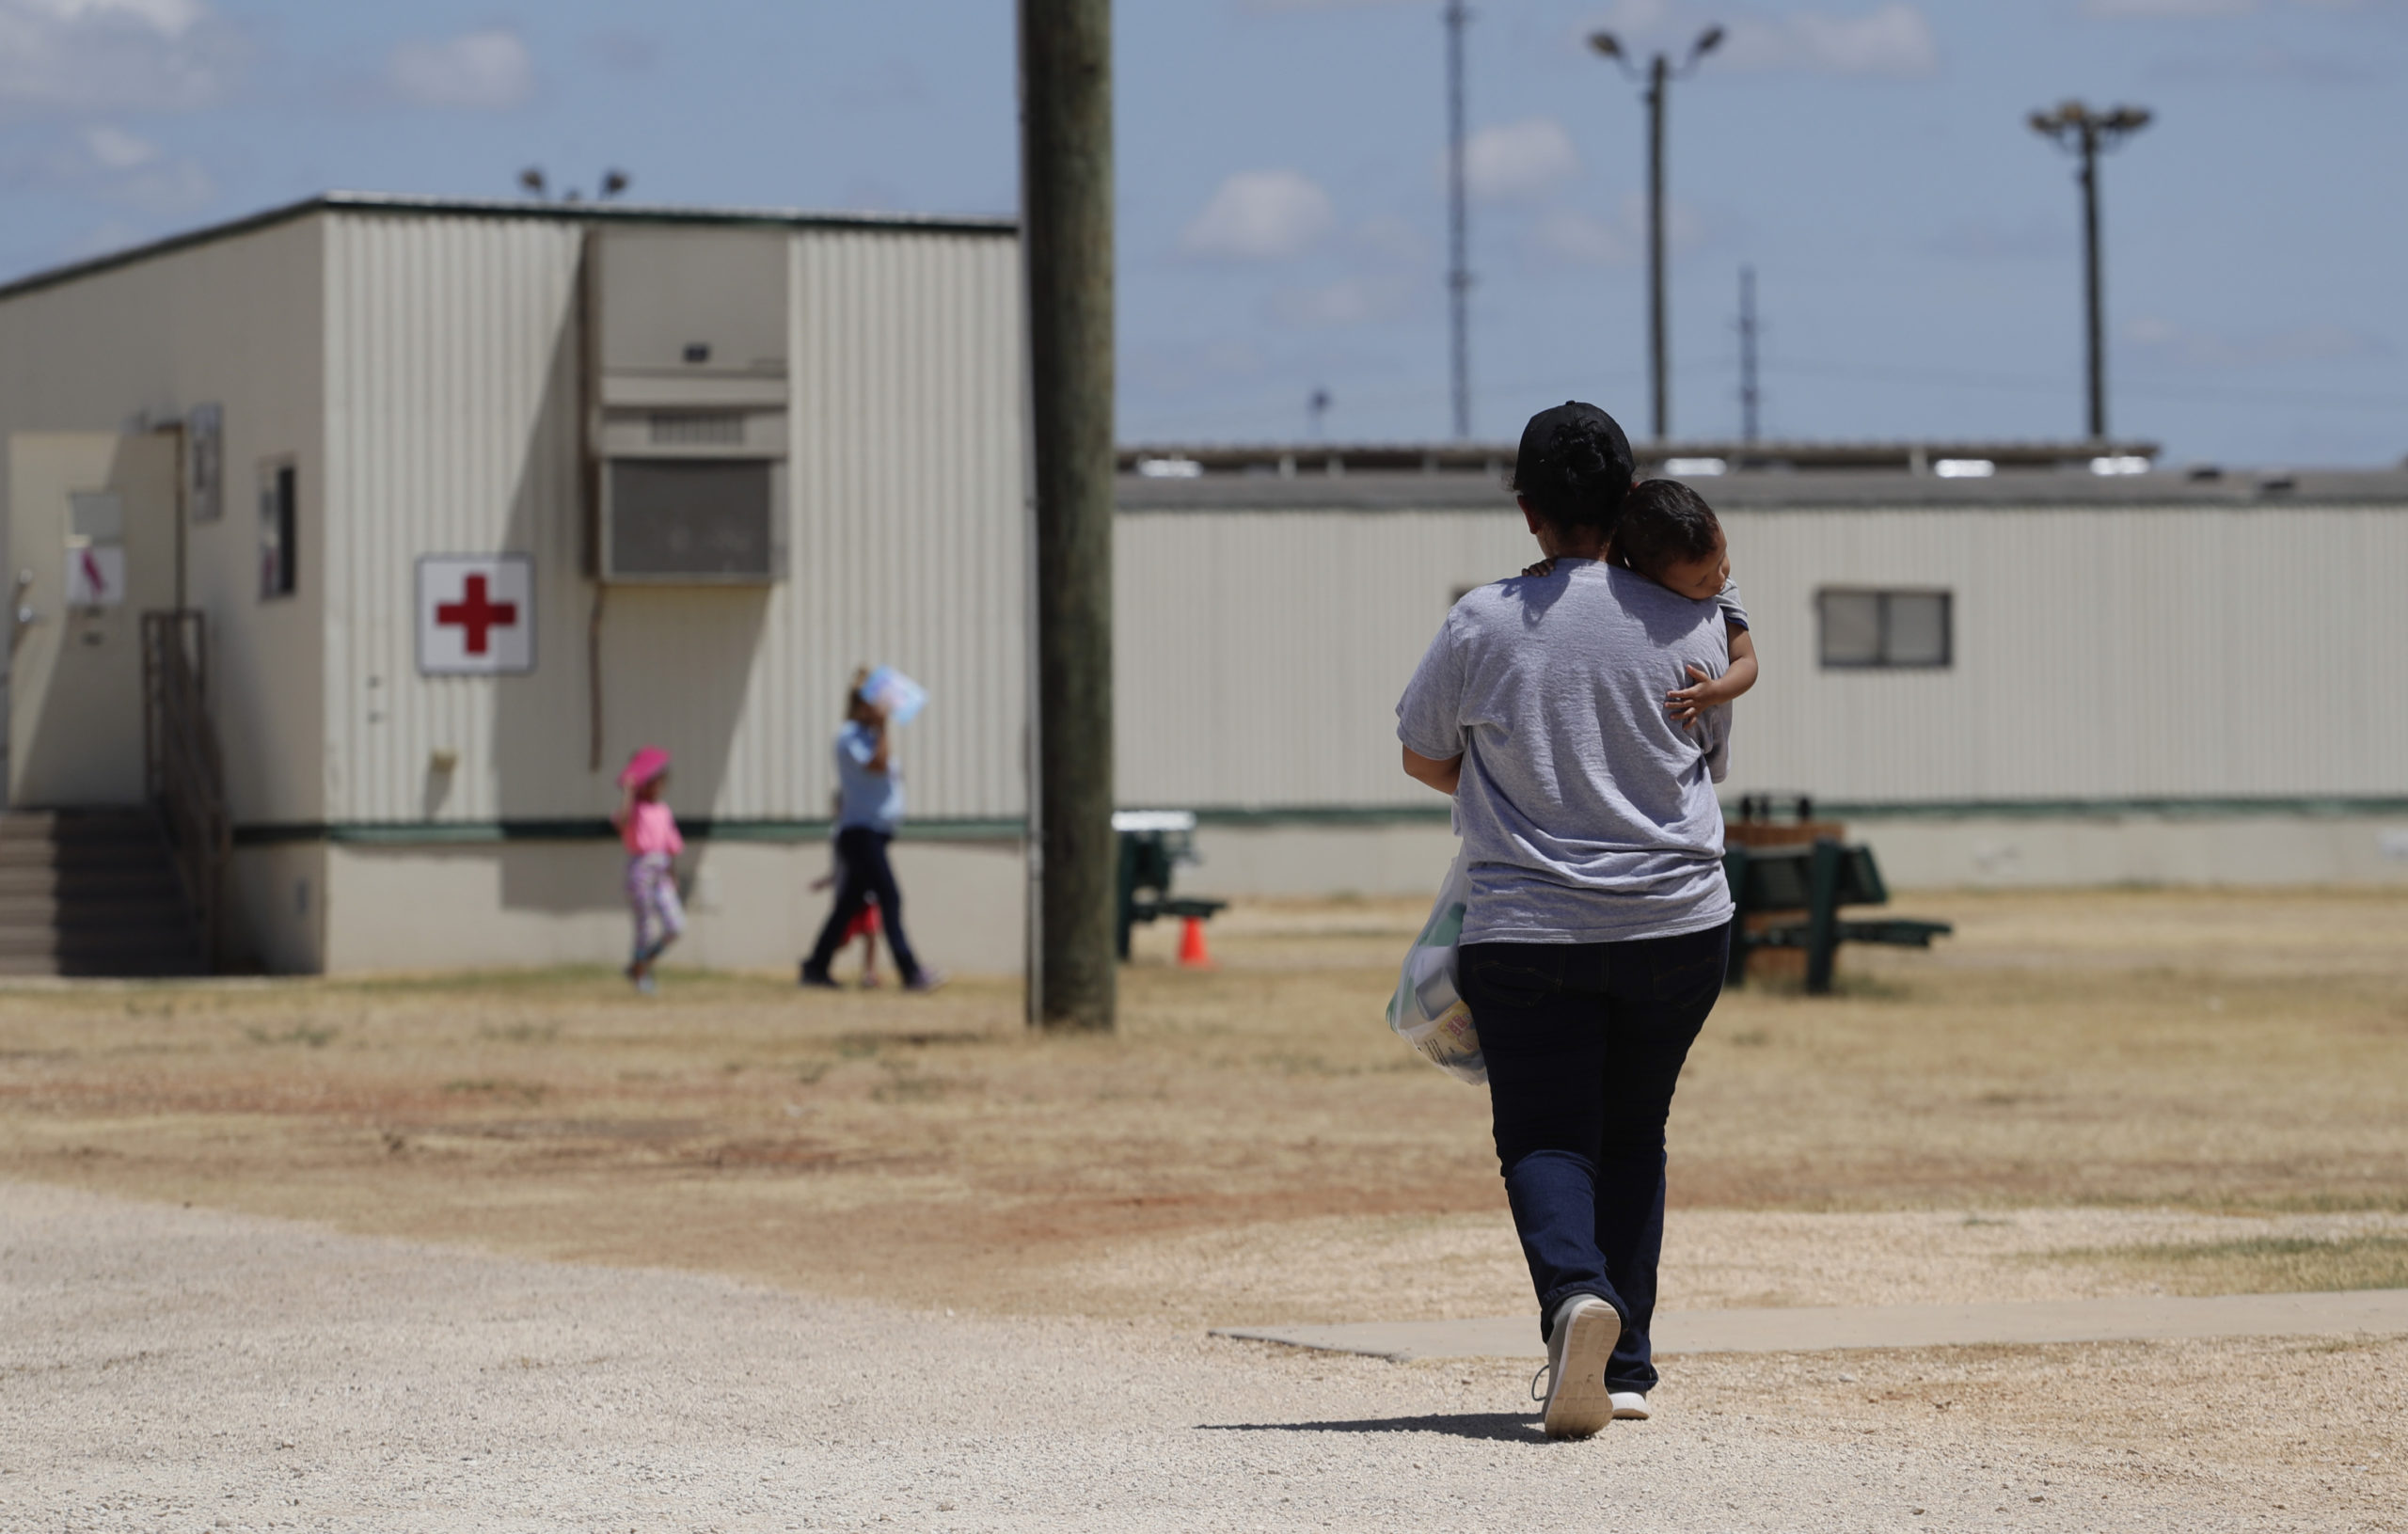 An immigrant mother holding a young child walks in a bare exercise yard at an ICE immigrant detention facility.